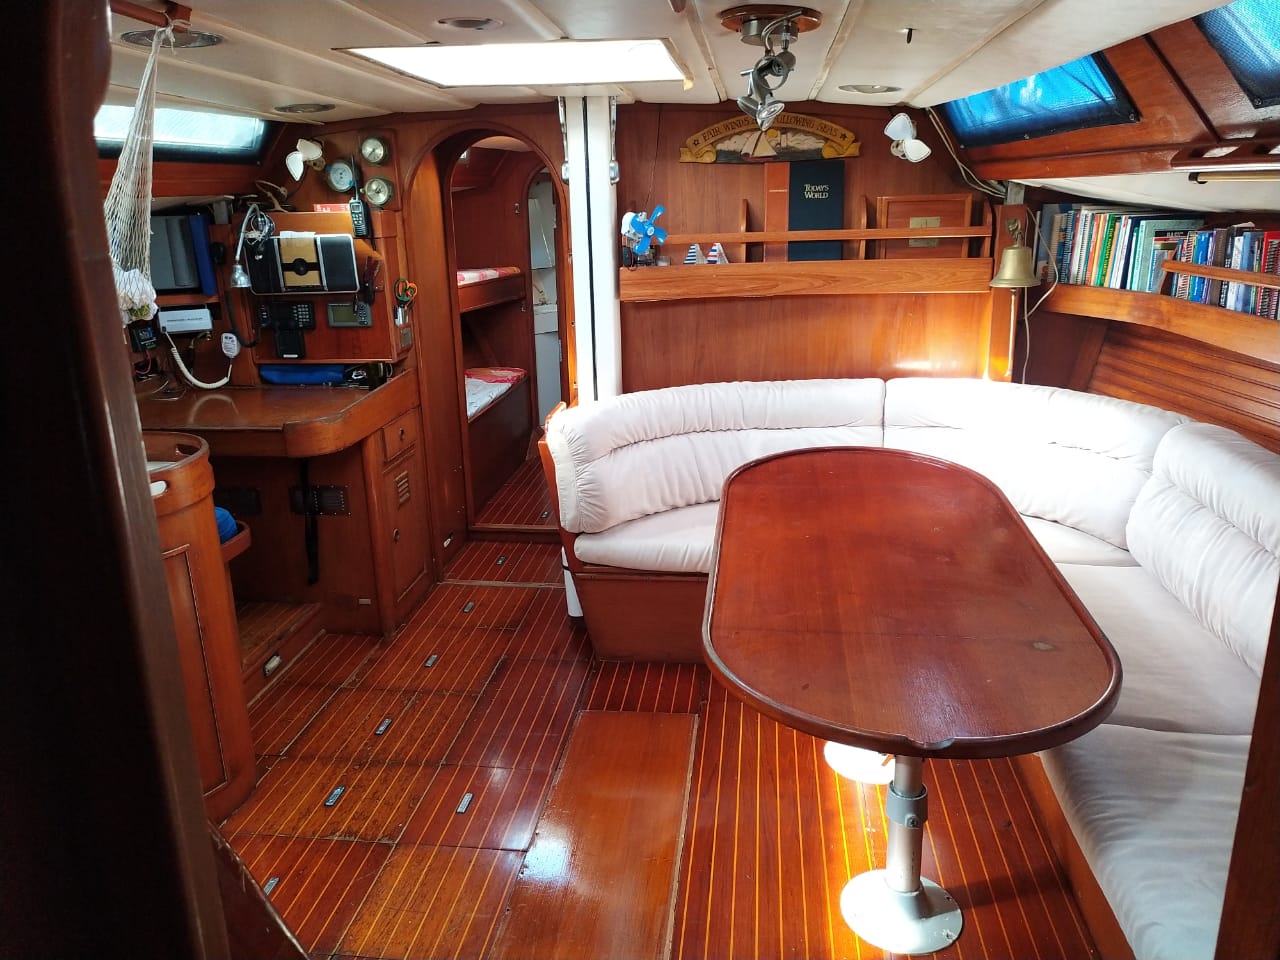 a living area of a boat with a couch and a table. a common area in a hosted sailboat stay with sea gypsy